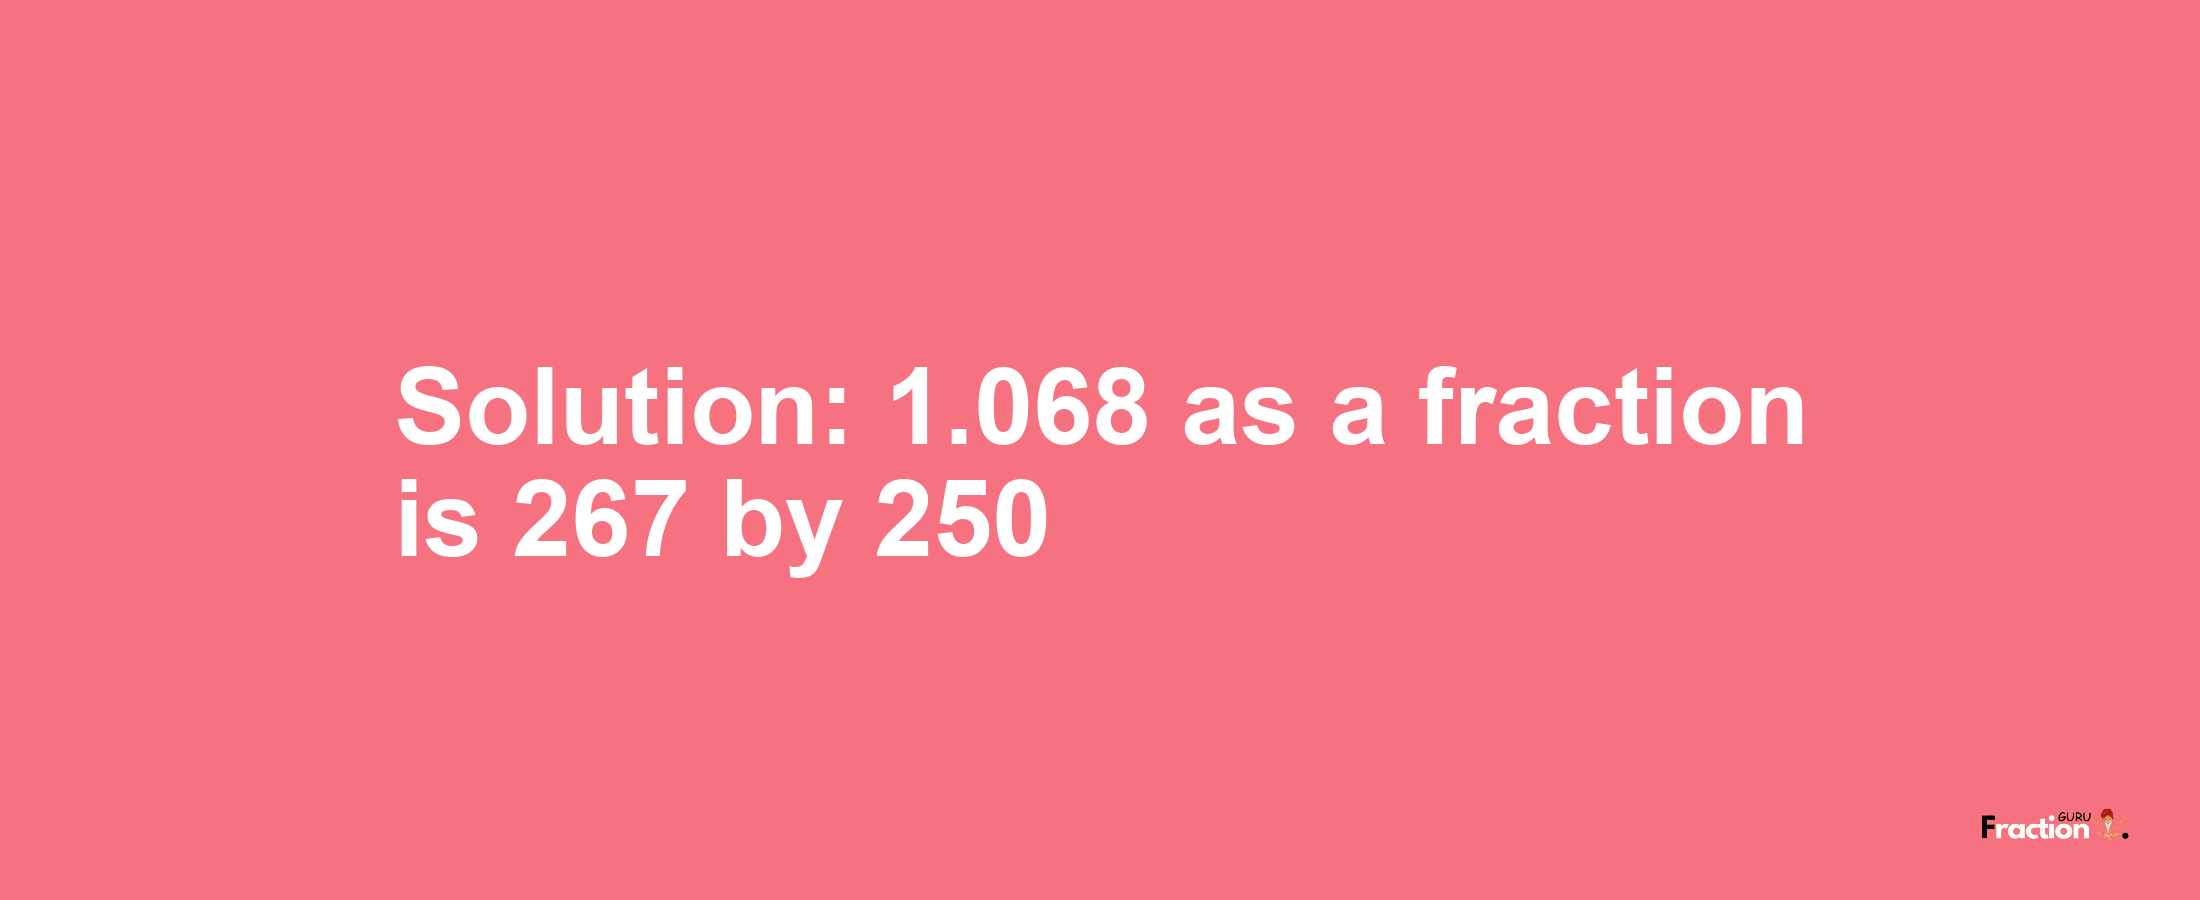 Solution:1.068 as a fraction is 267/250